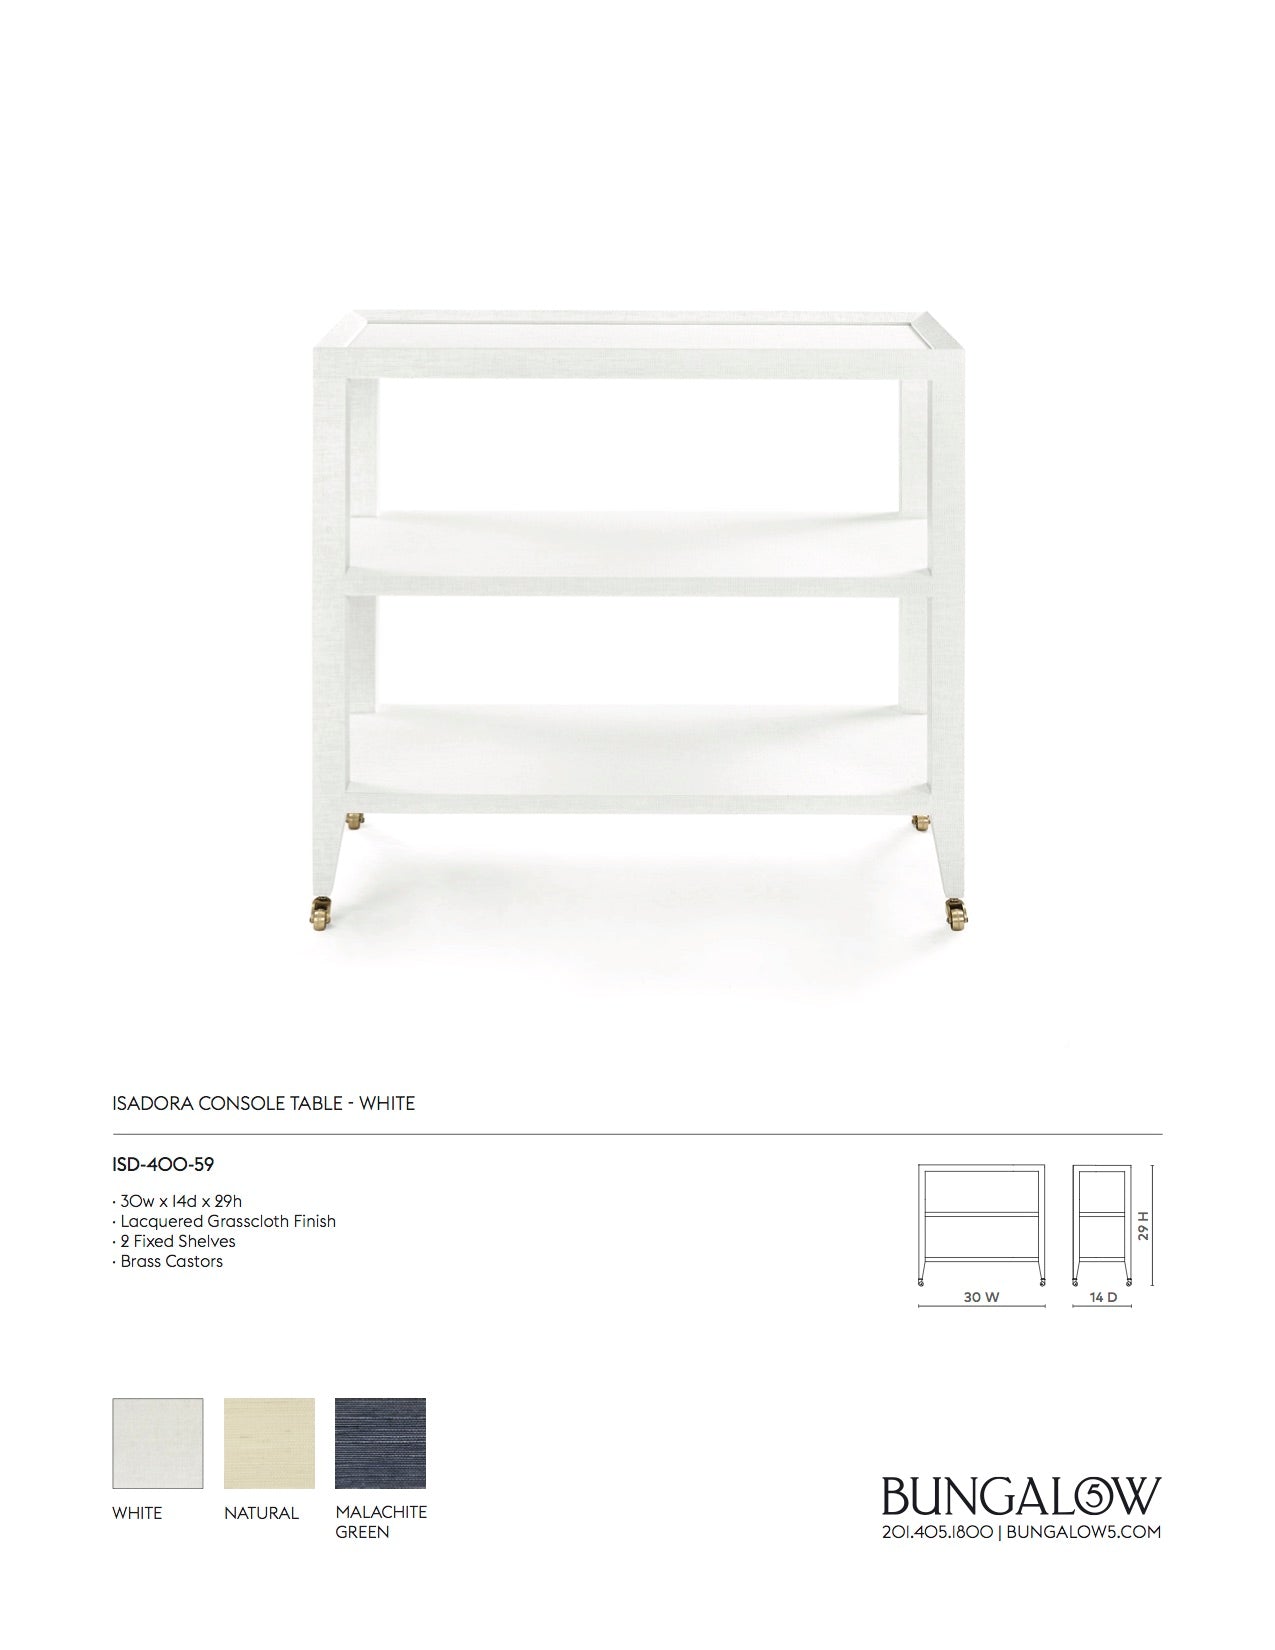 Bungalow 5 Isadora Console Table White Tearsheet